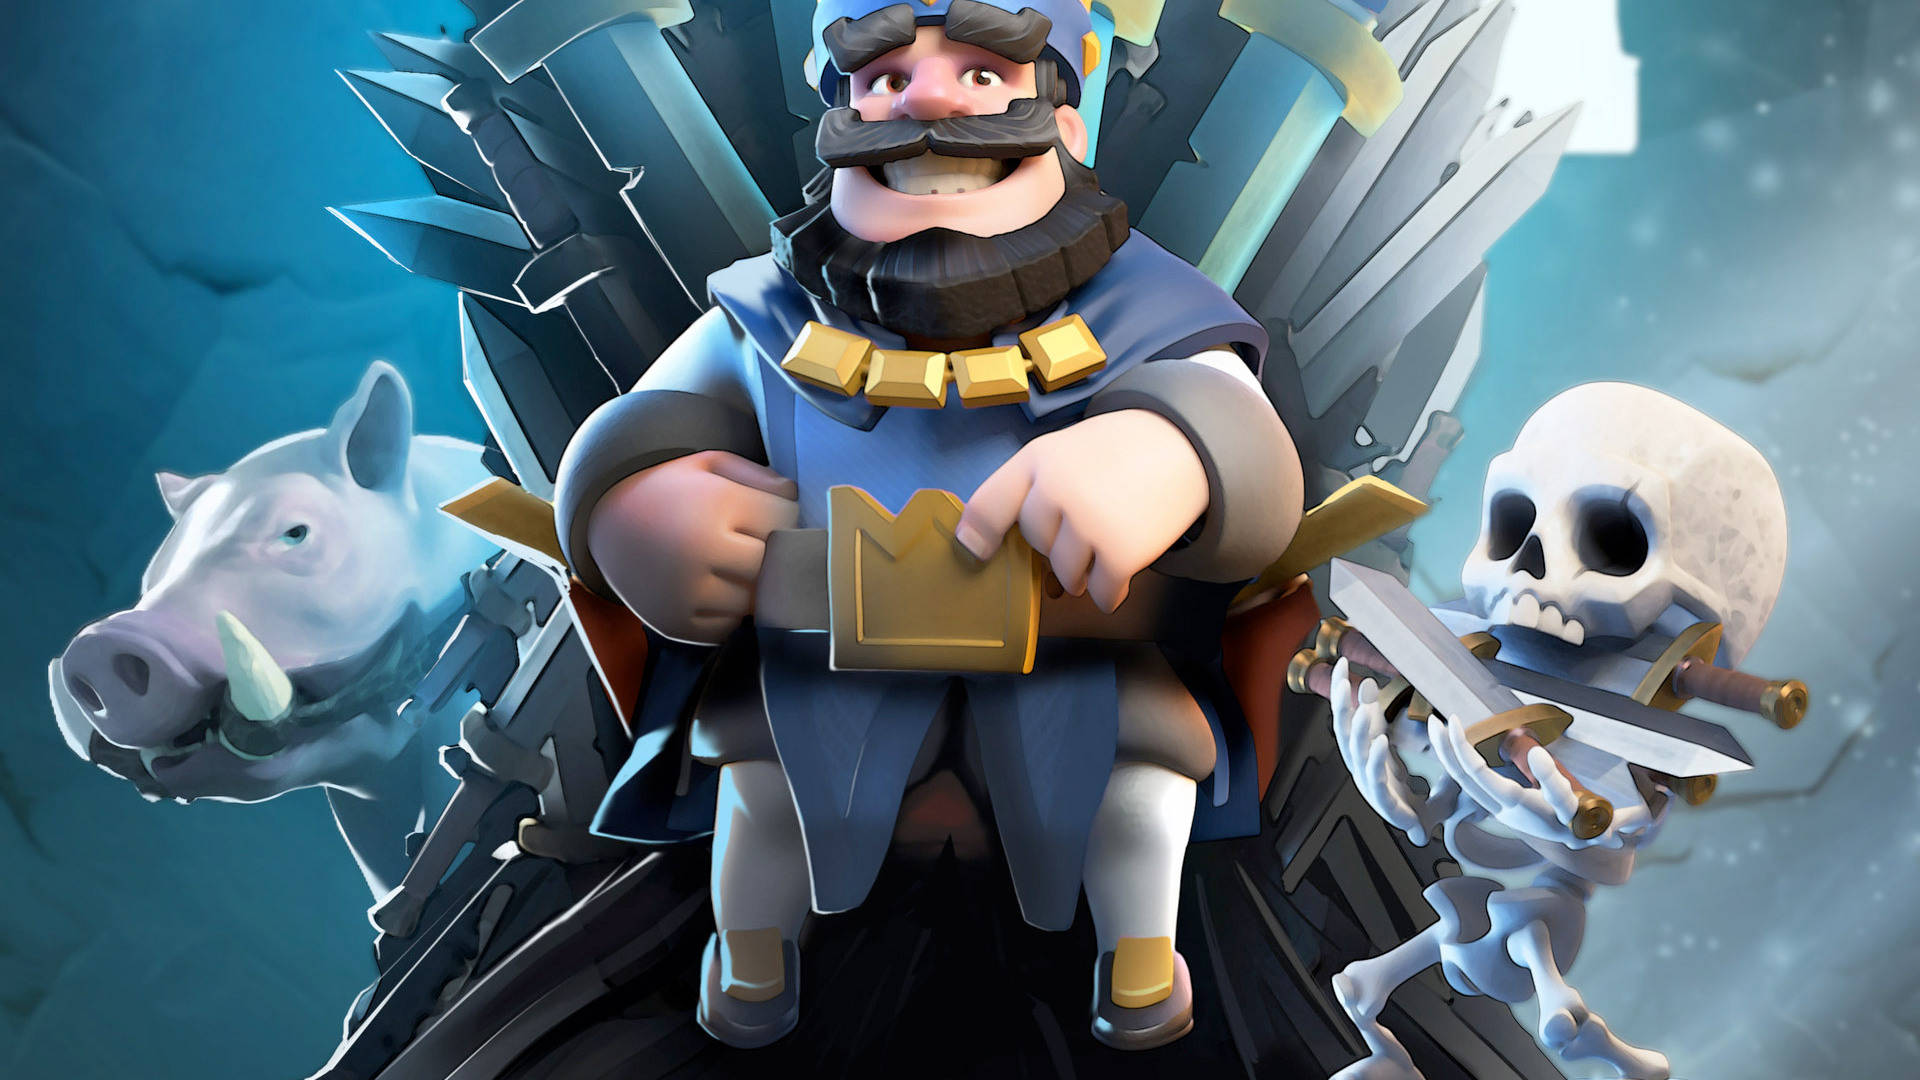 Free Clash Royale Wallpaper Downloads, [100+] Clash Royale Wallpapers for  FREE 